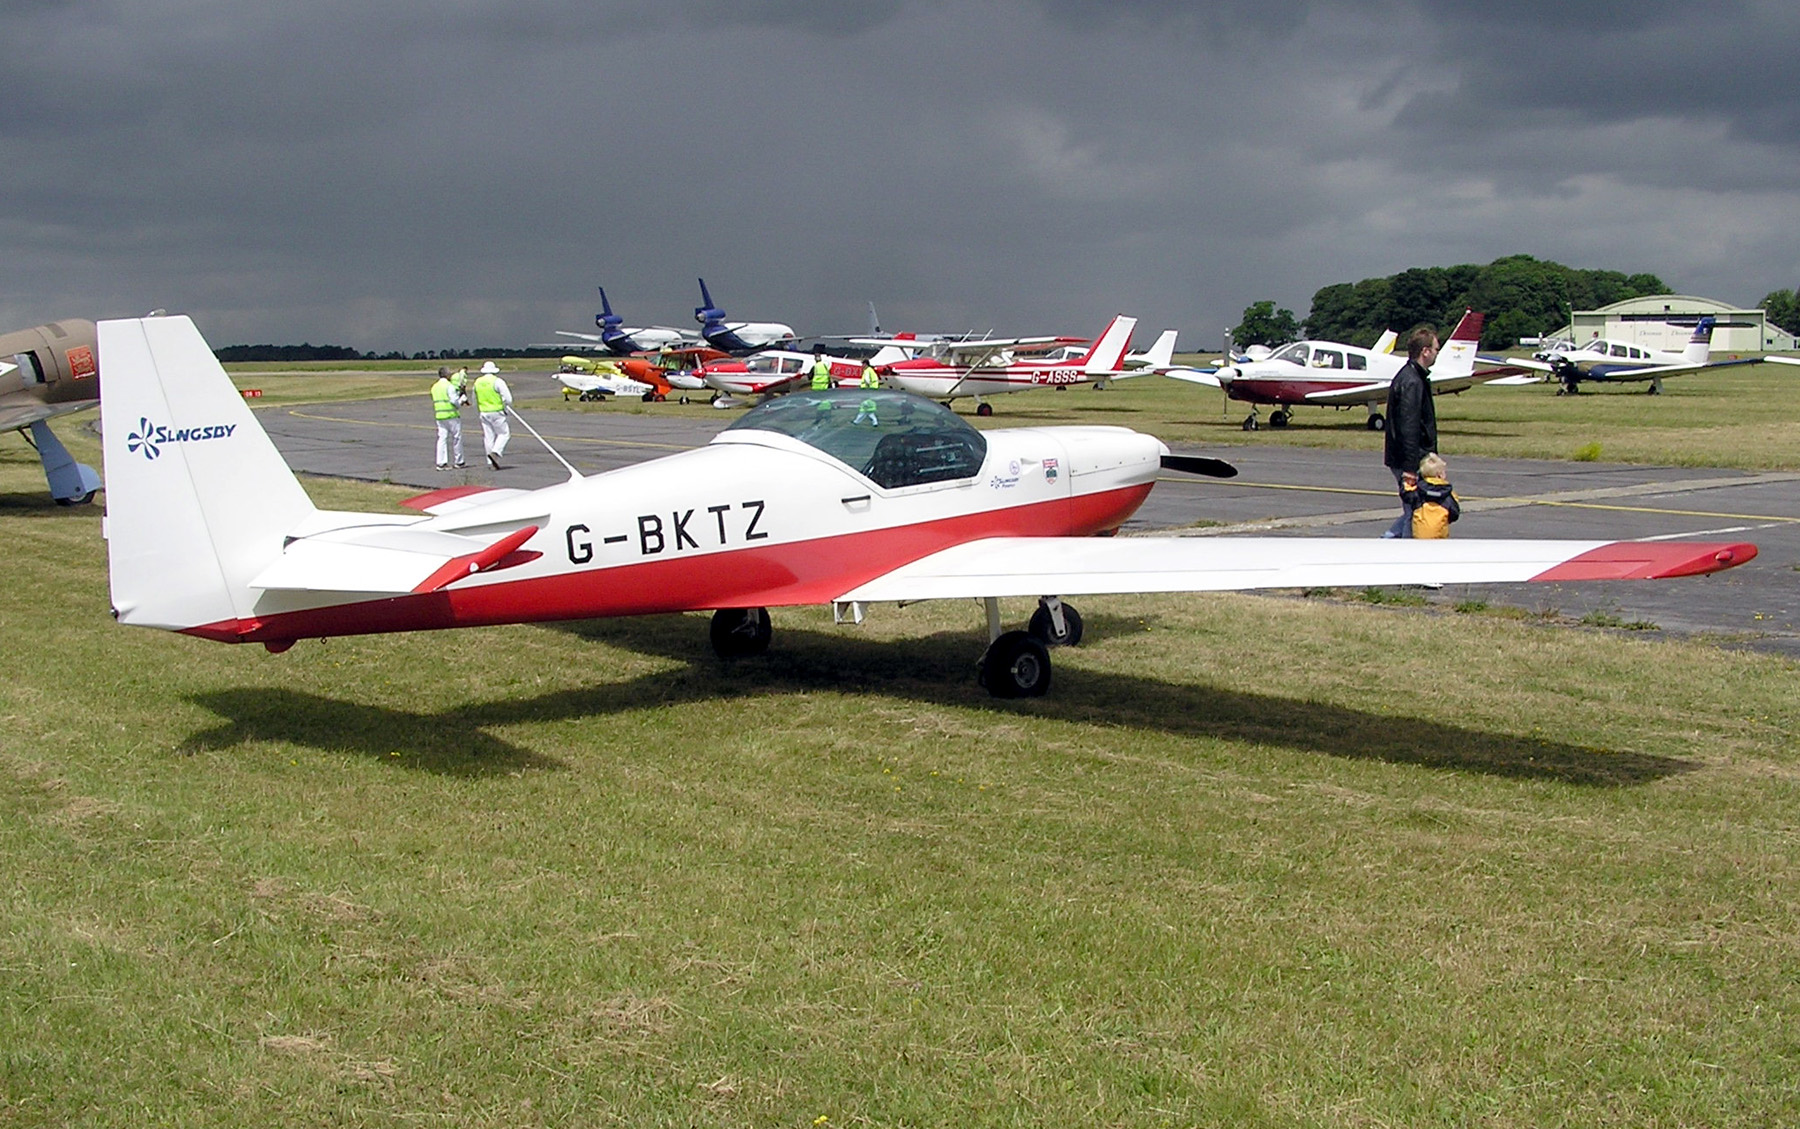 Slingsby T-67 Firefly previous